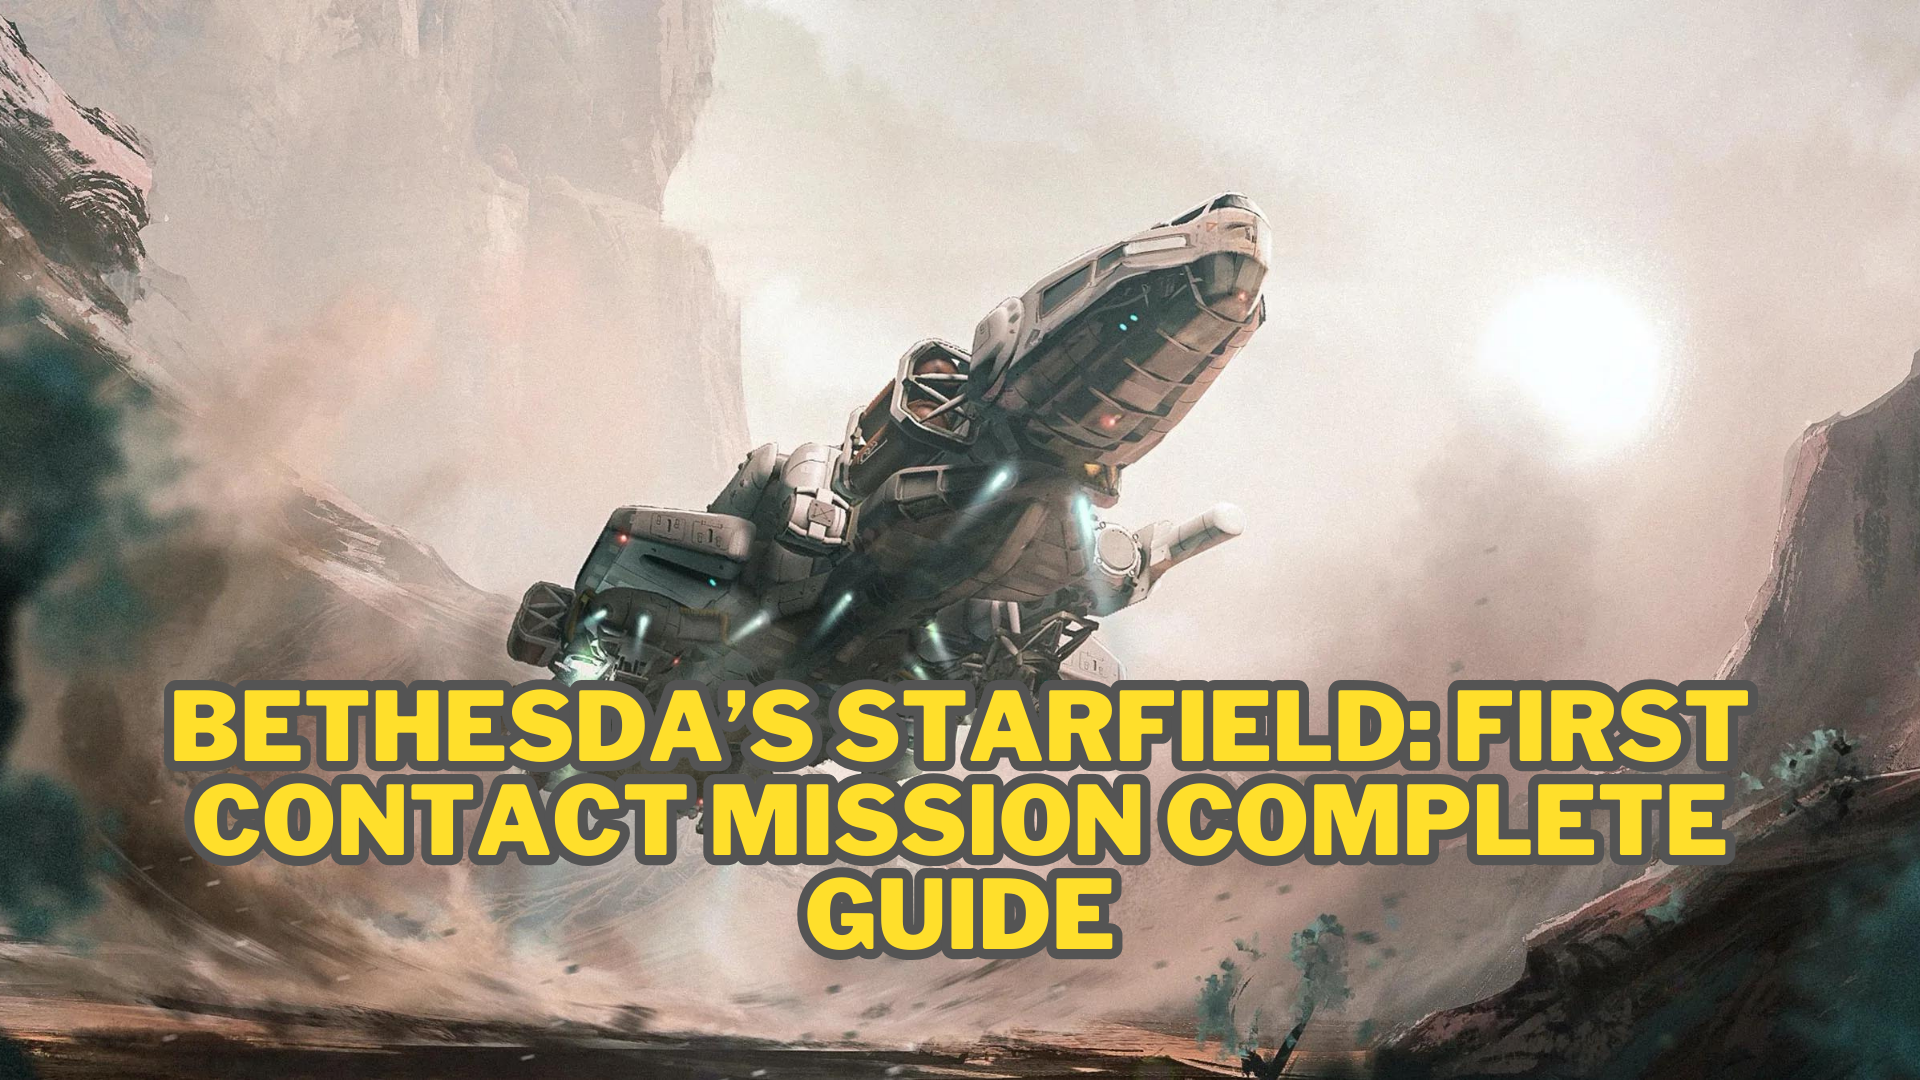 Bethesda’s Starfield: First Contact Mission Complete Guide